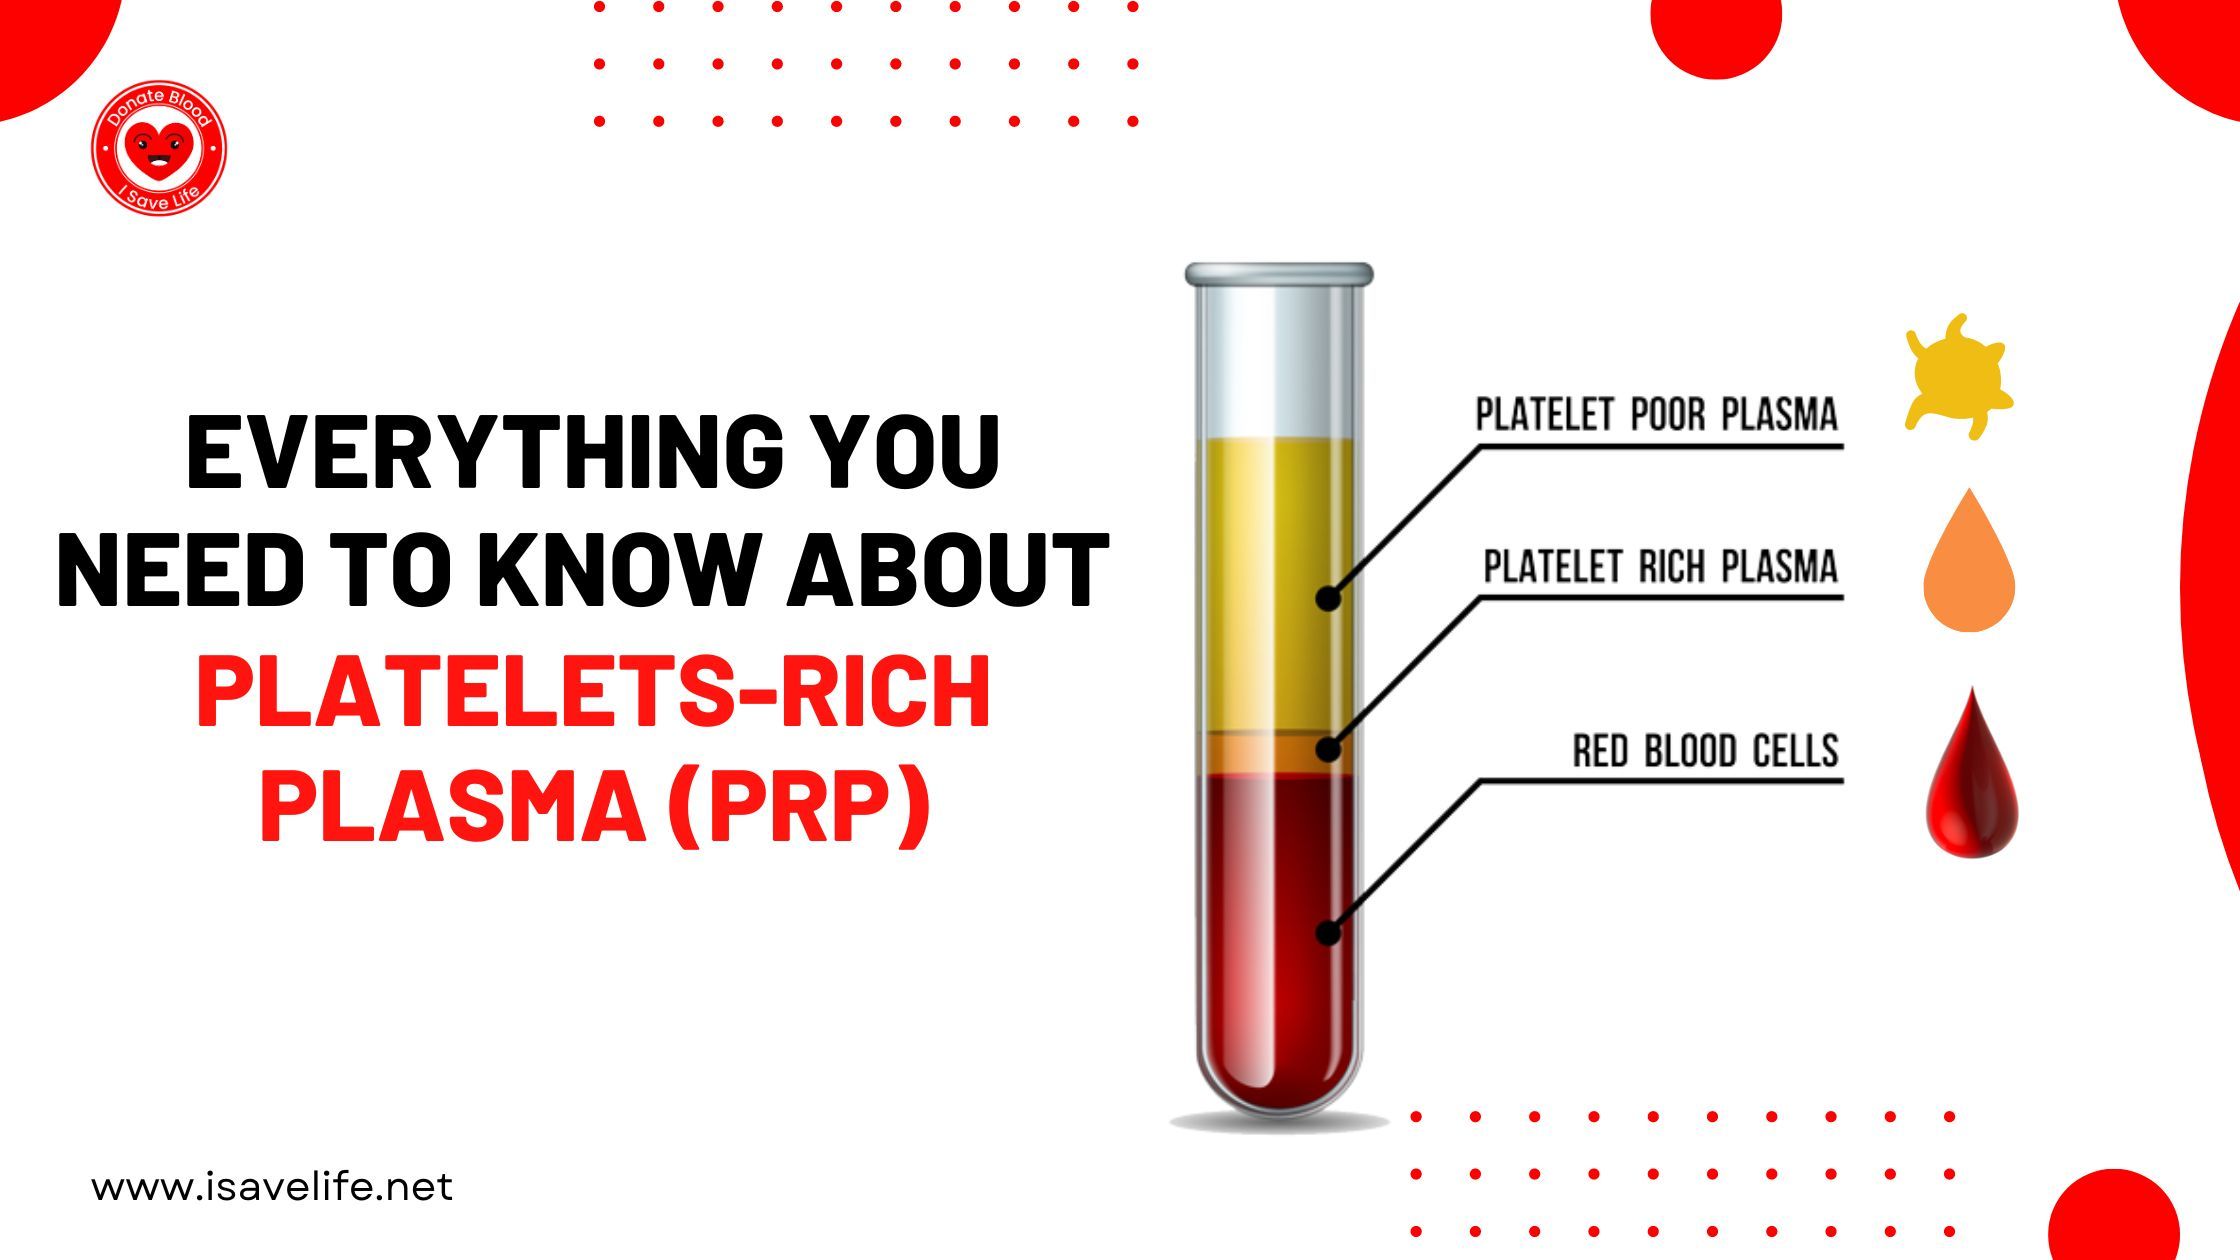 Everything You Need to Know about Platelets-Rich Plasma (PRP)